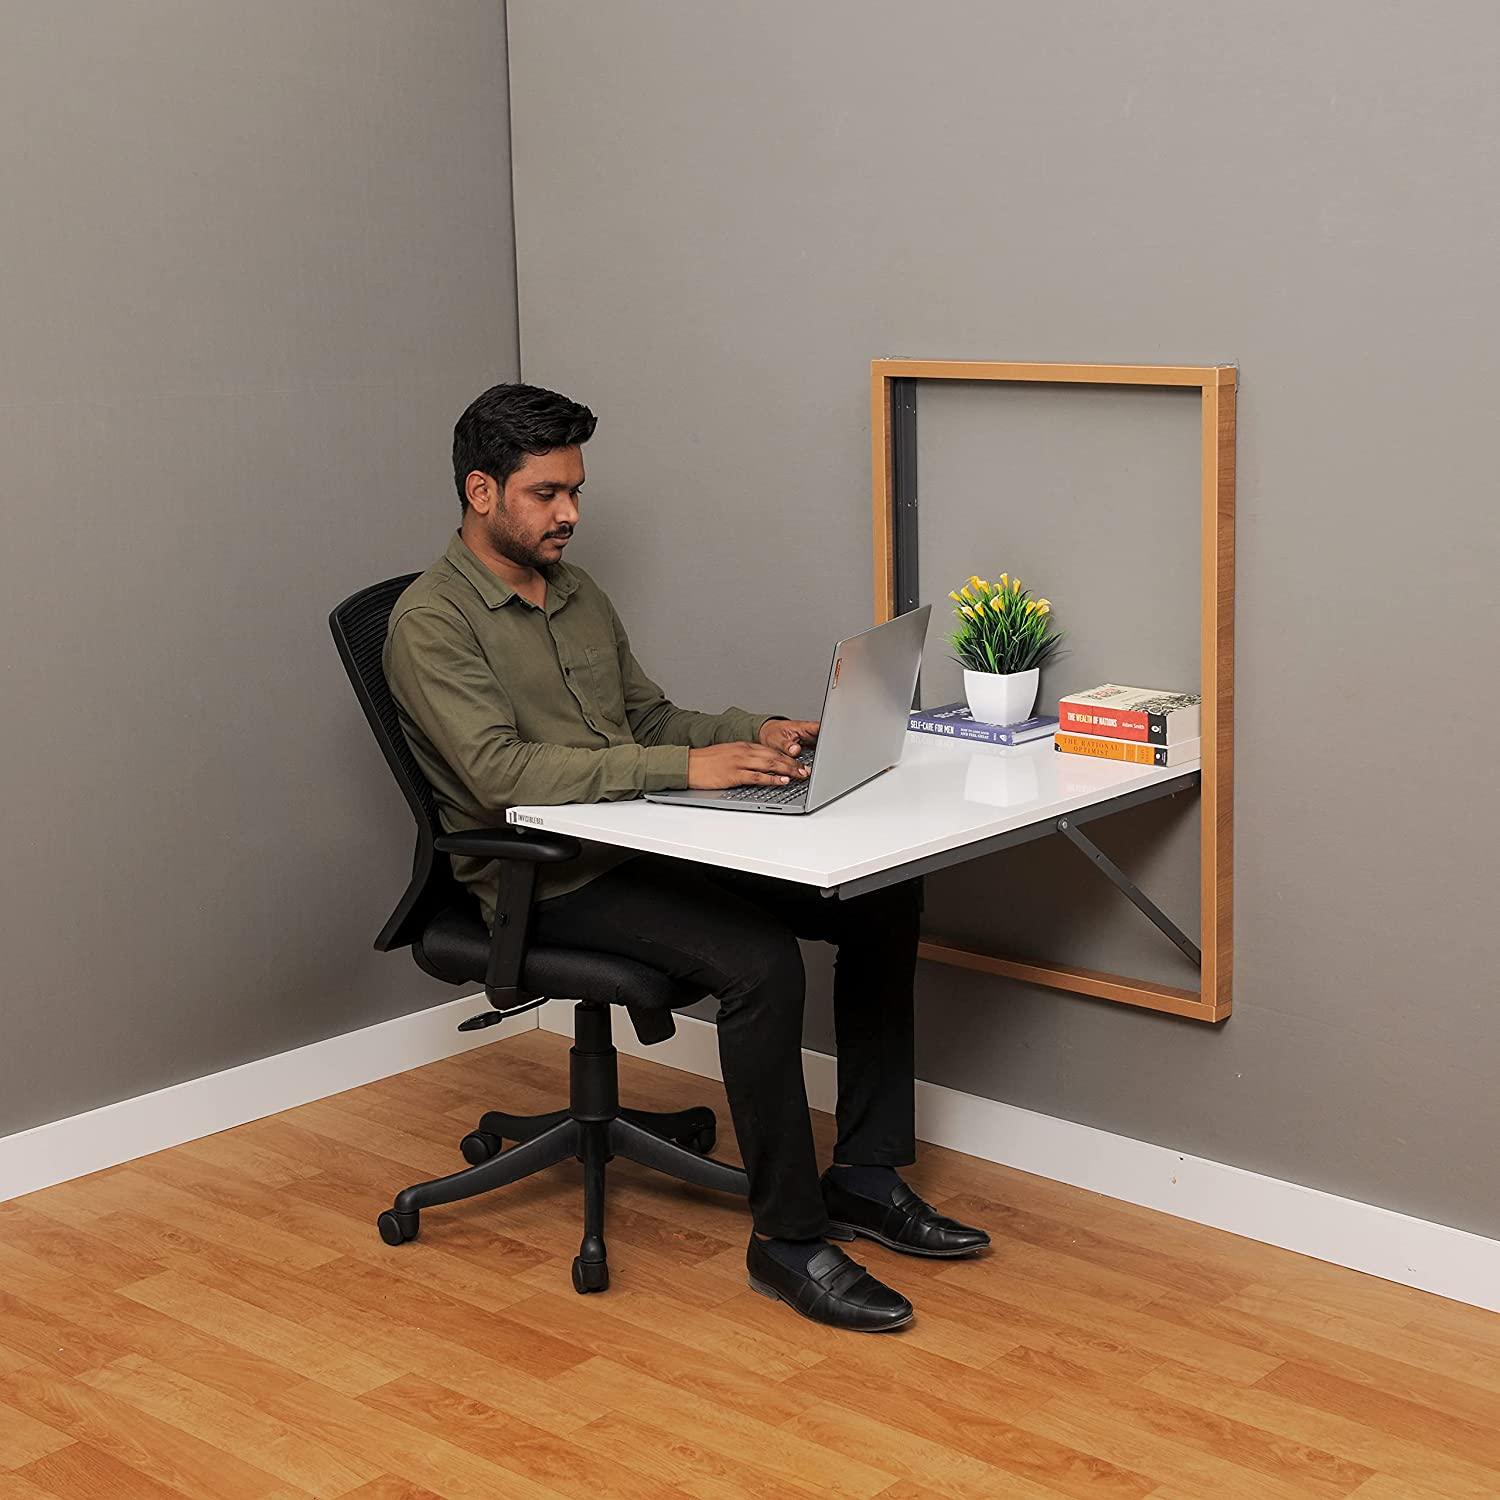 Wall Mounted Dining & Study Table - InvisibleBed.com